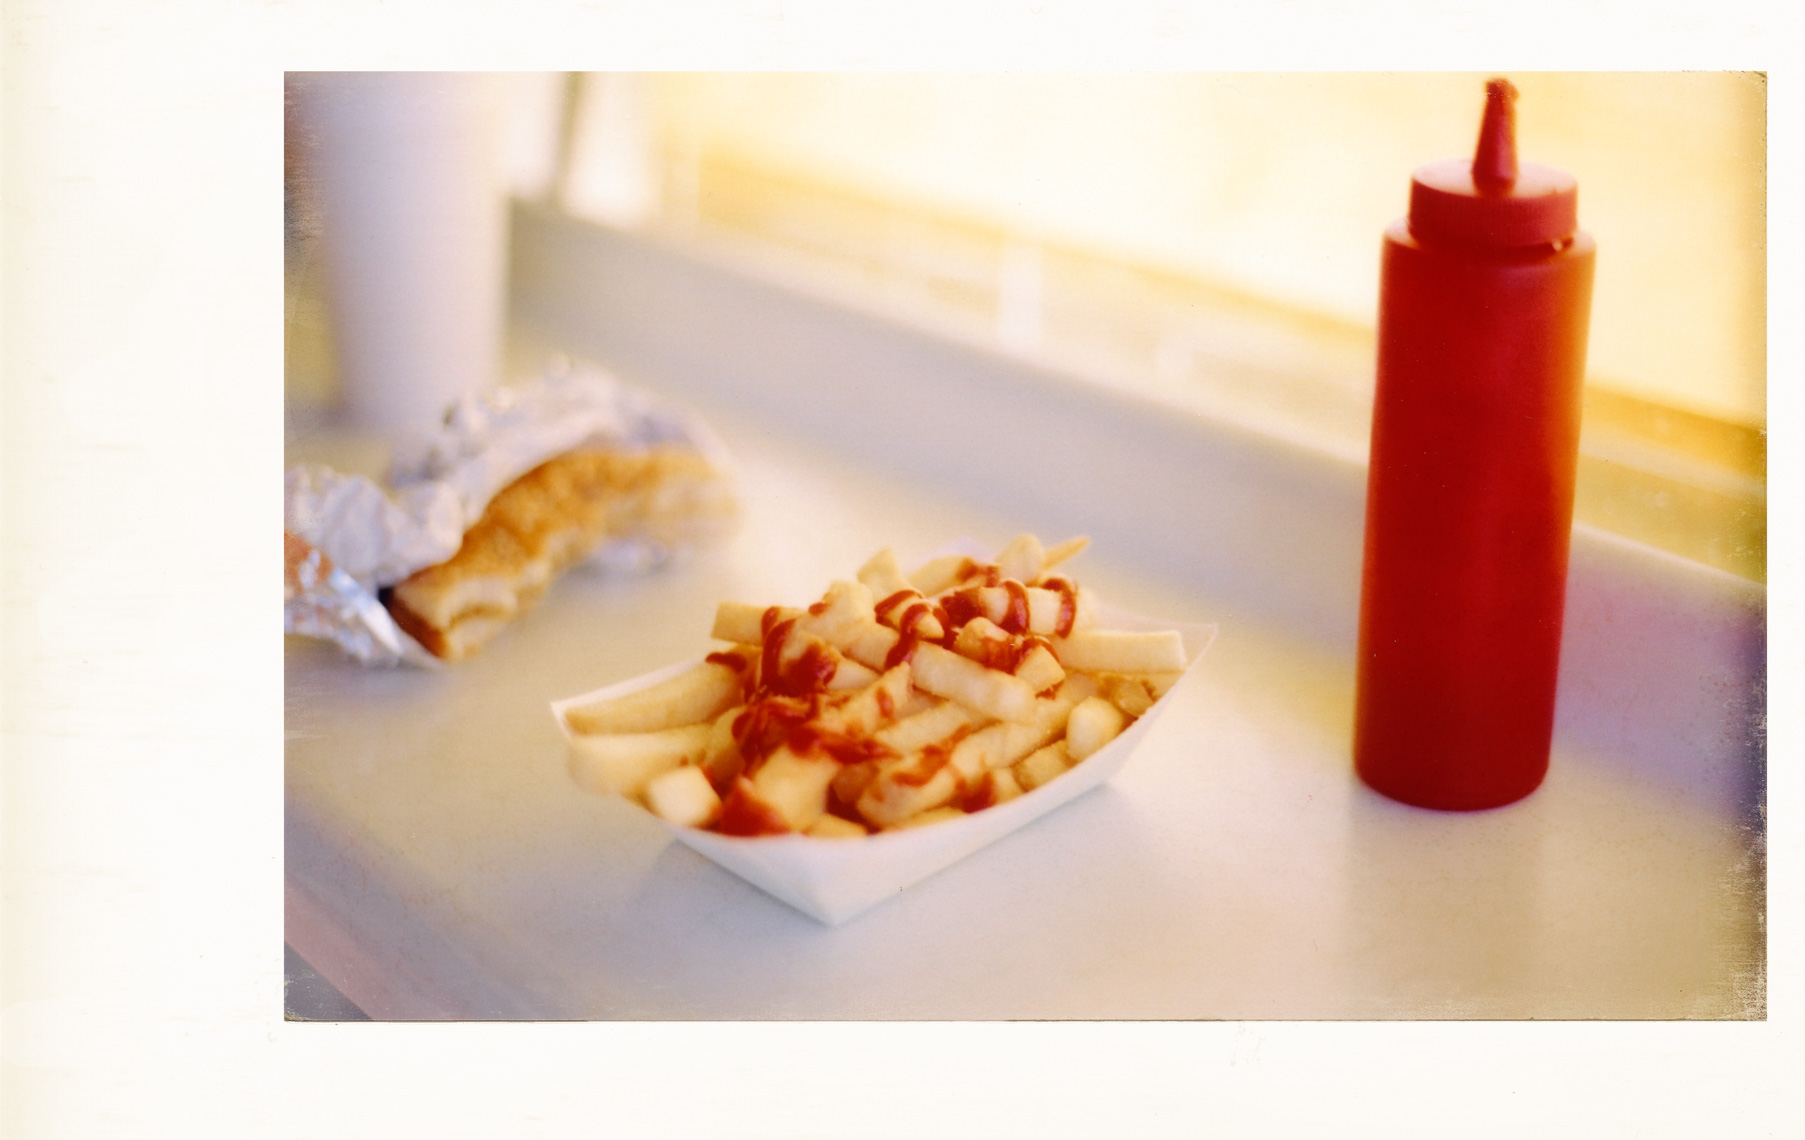 French fries ketchup | Editorial Food Photographer